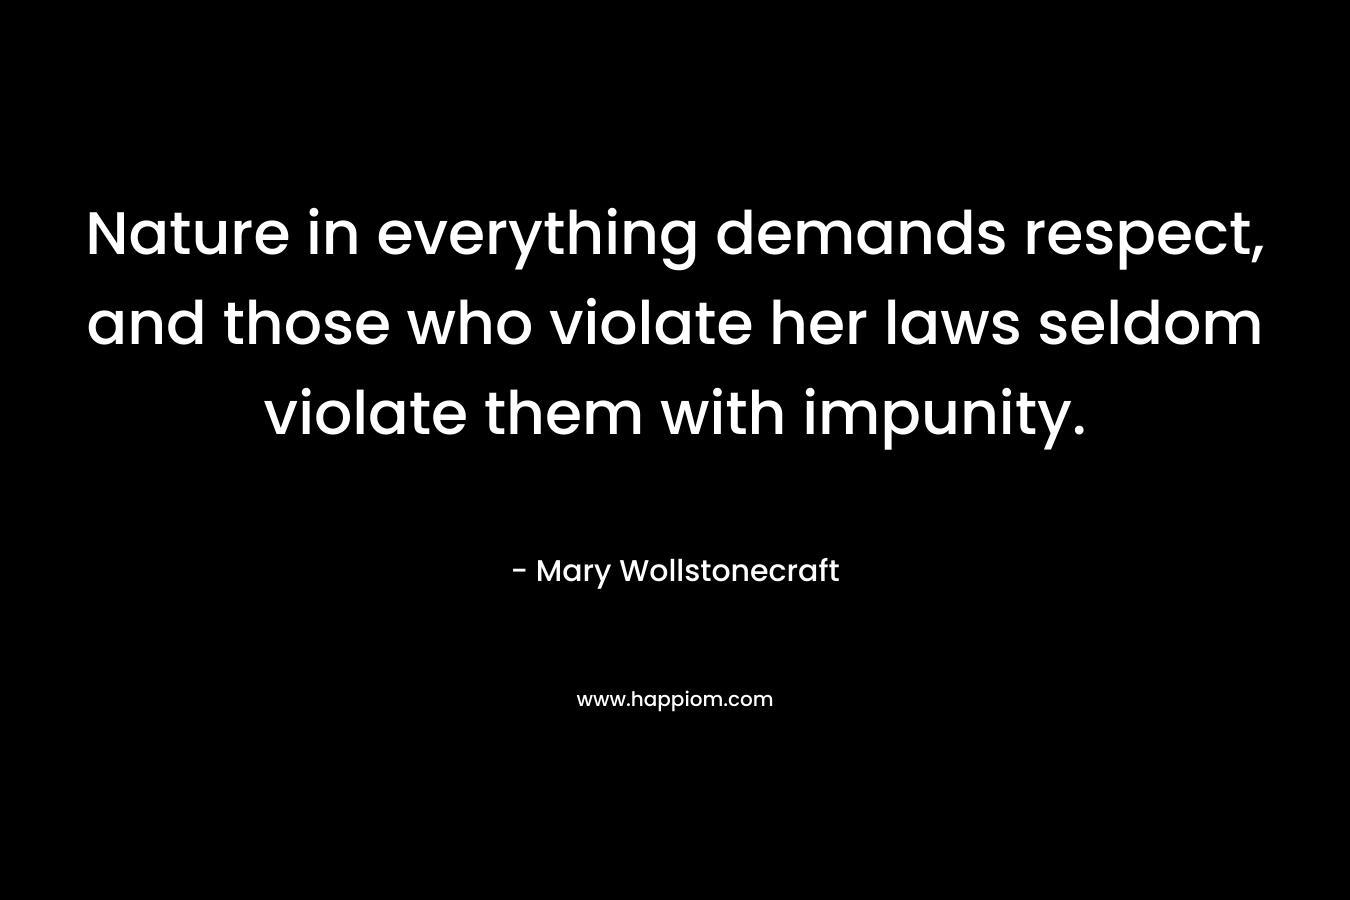 Nature in everything demands respect, and those who violate her laws seldom violate them with impunity. – Mary Wollstonecraft